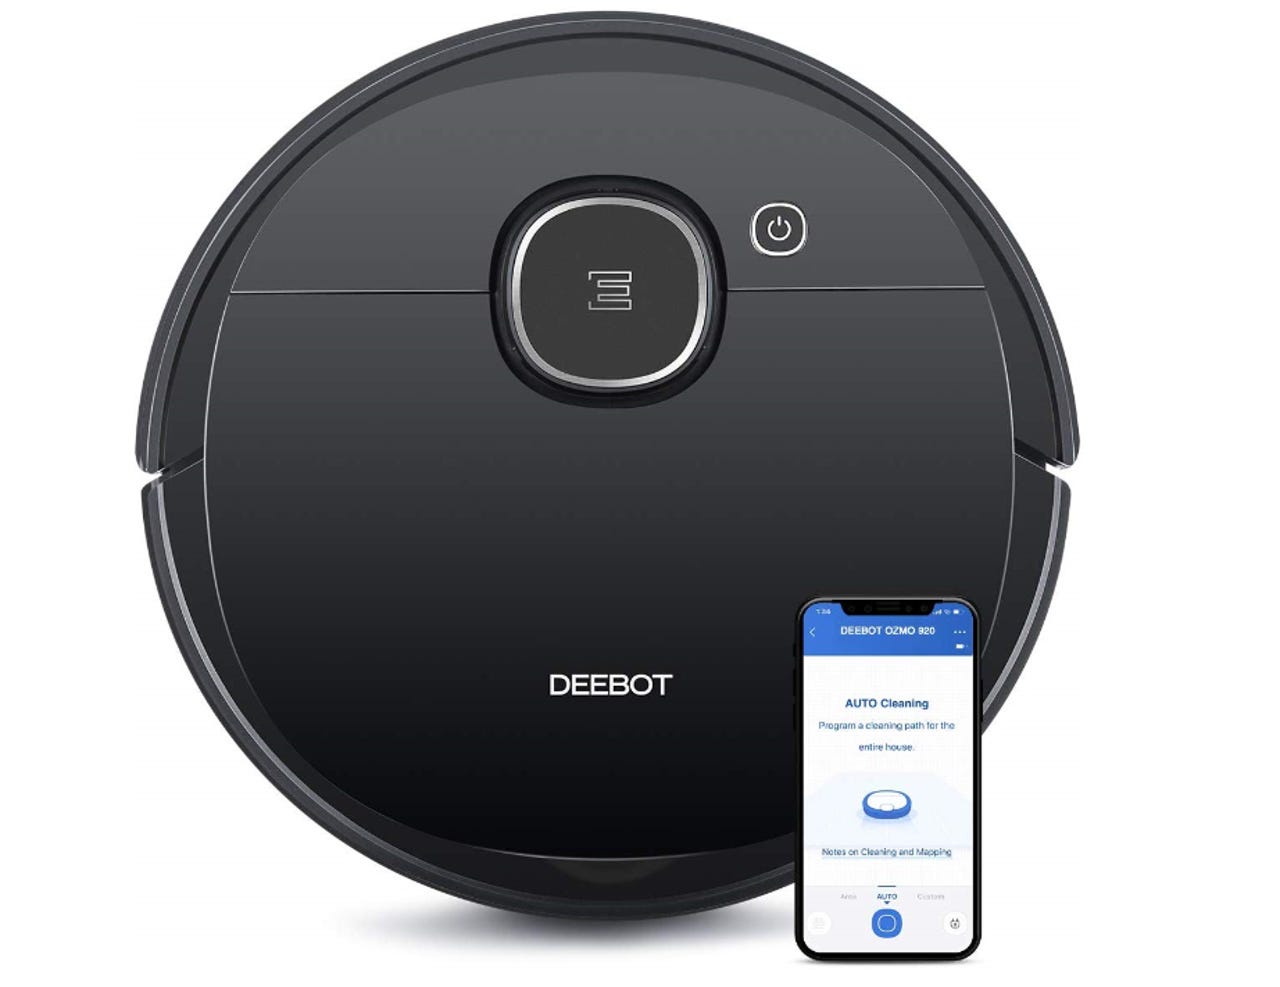 Hands on with the Ecovacs Deebot OSMO 920 robot vacuum A multi-use vacuum with smart app features zdnet